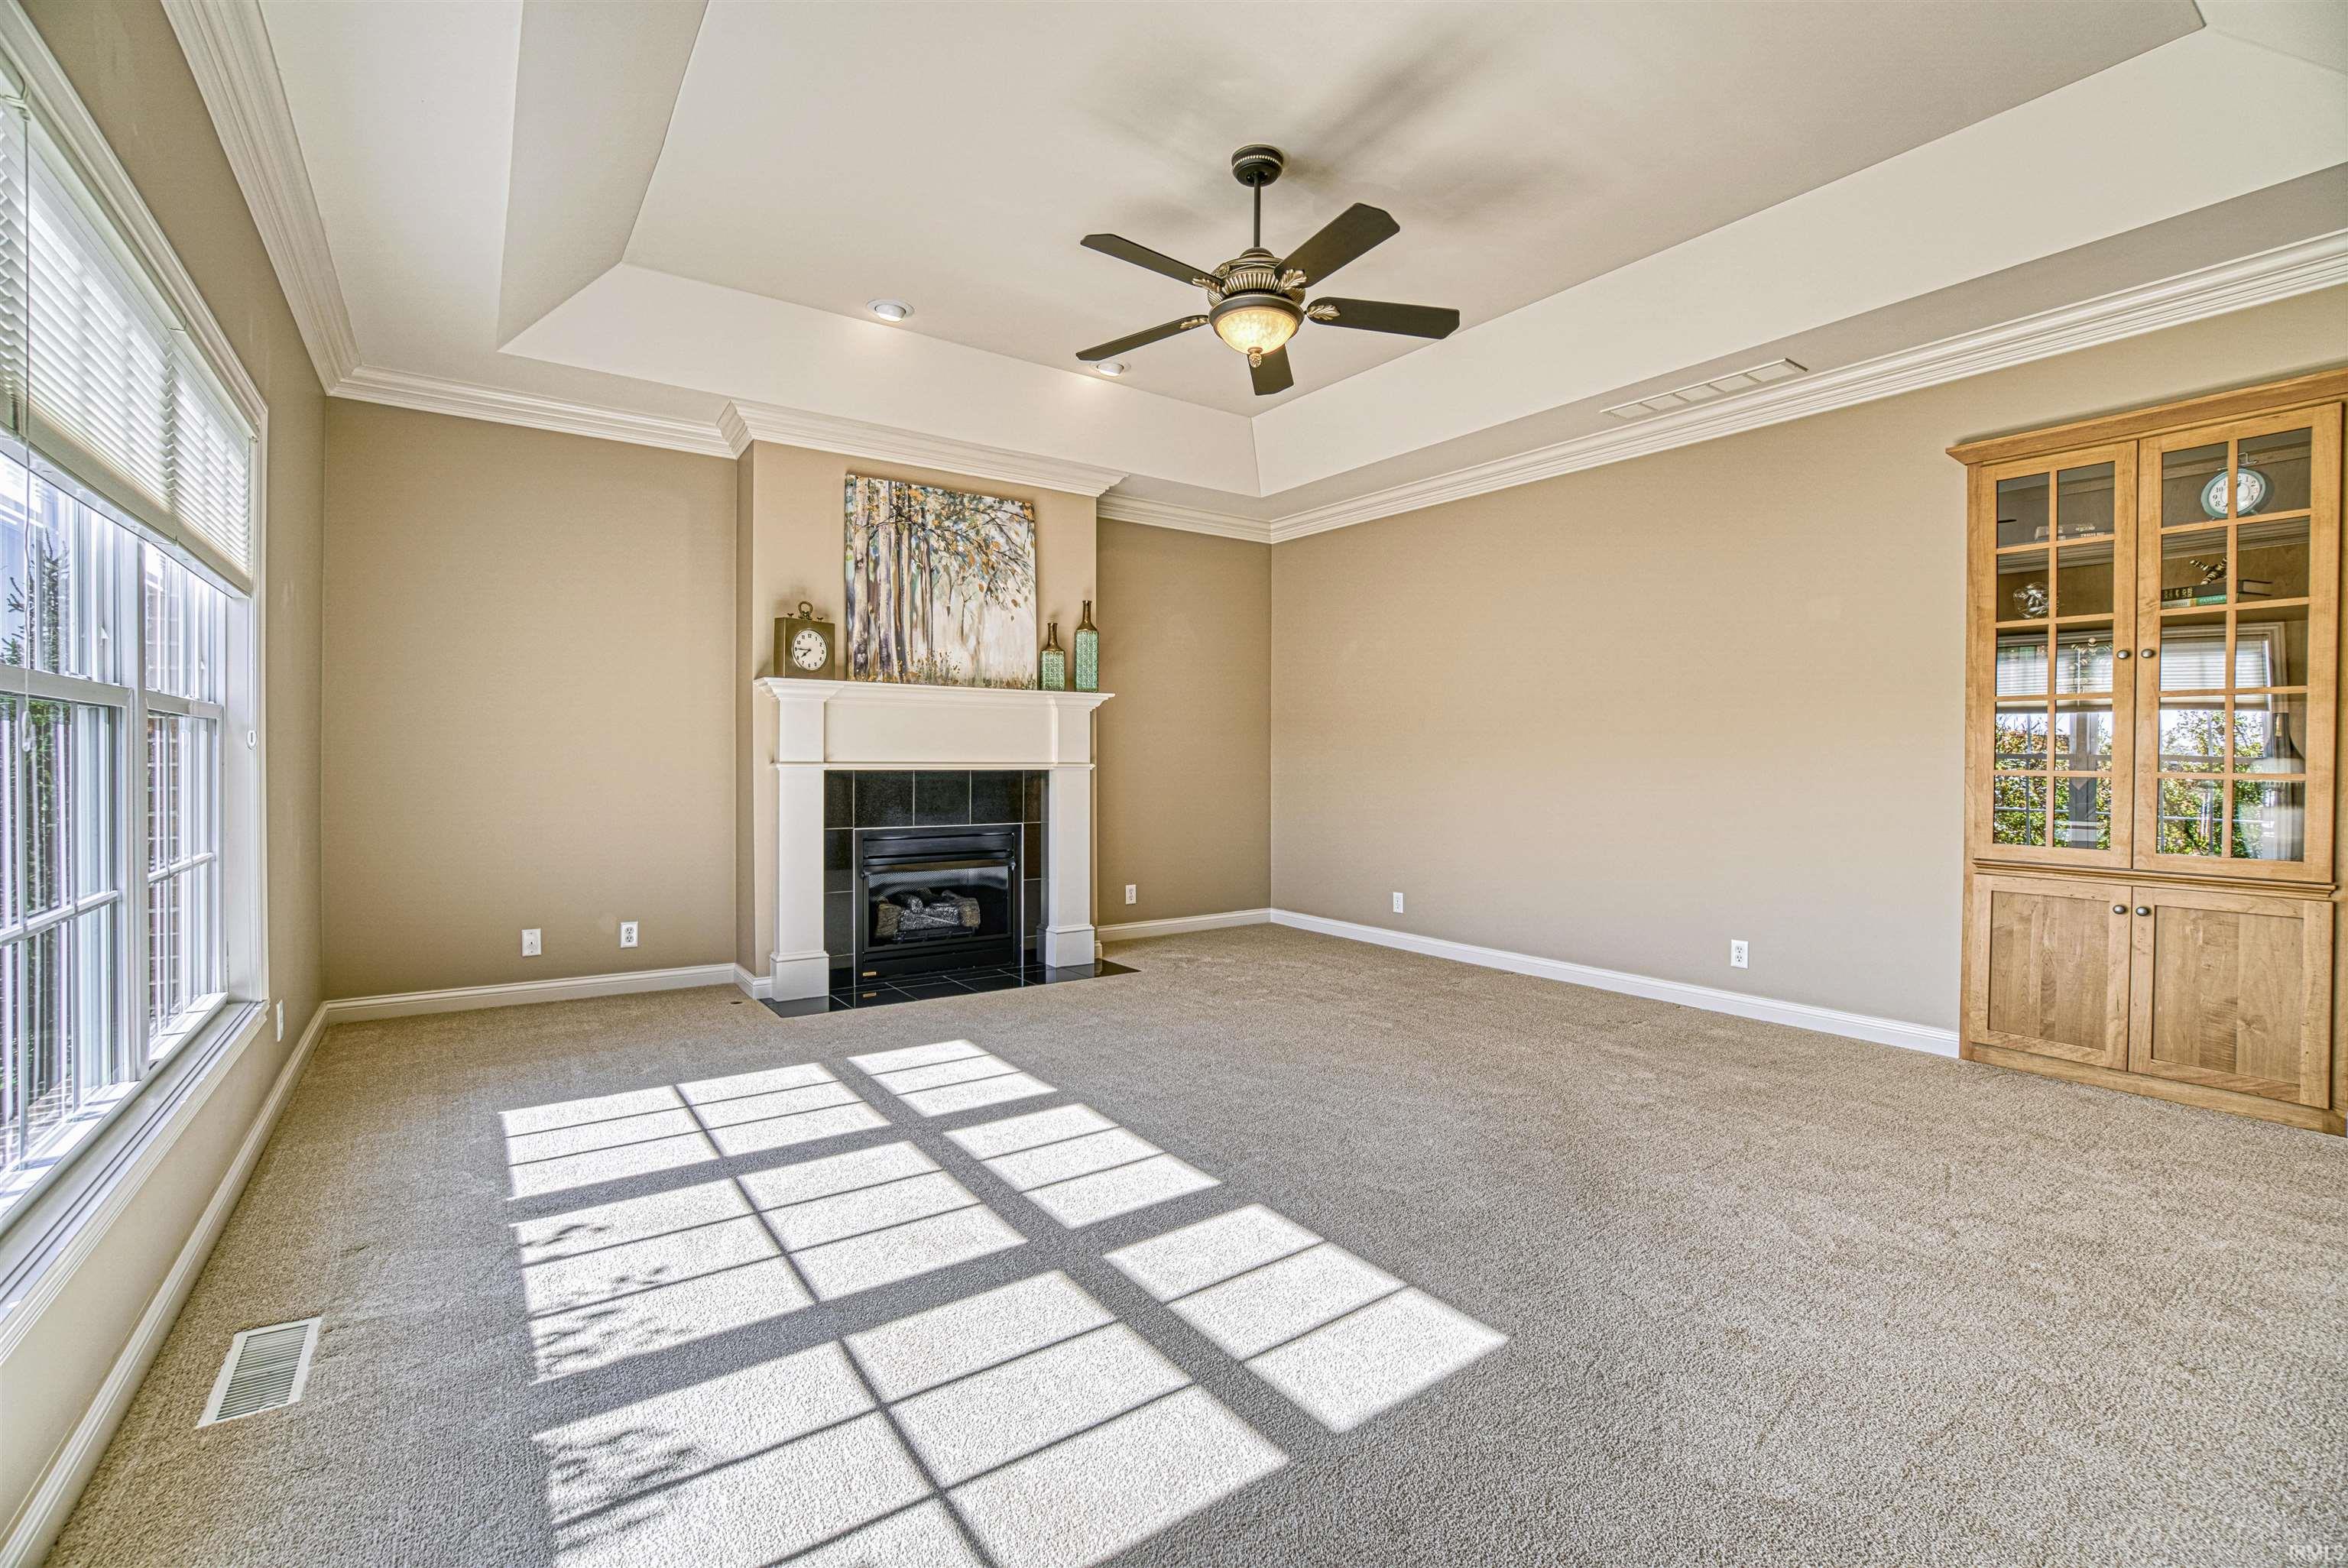 Additional features include tray ceiling and custom built-in